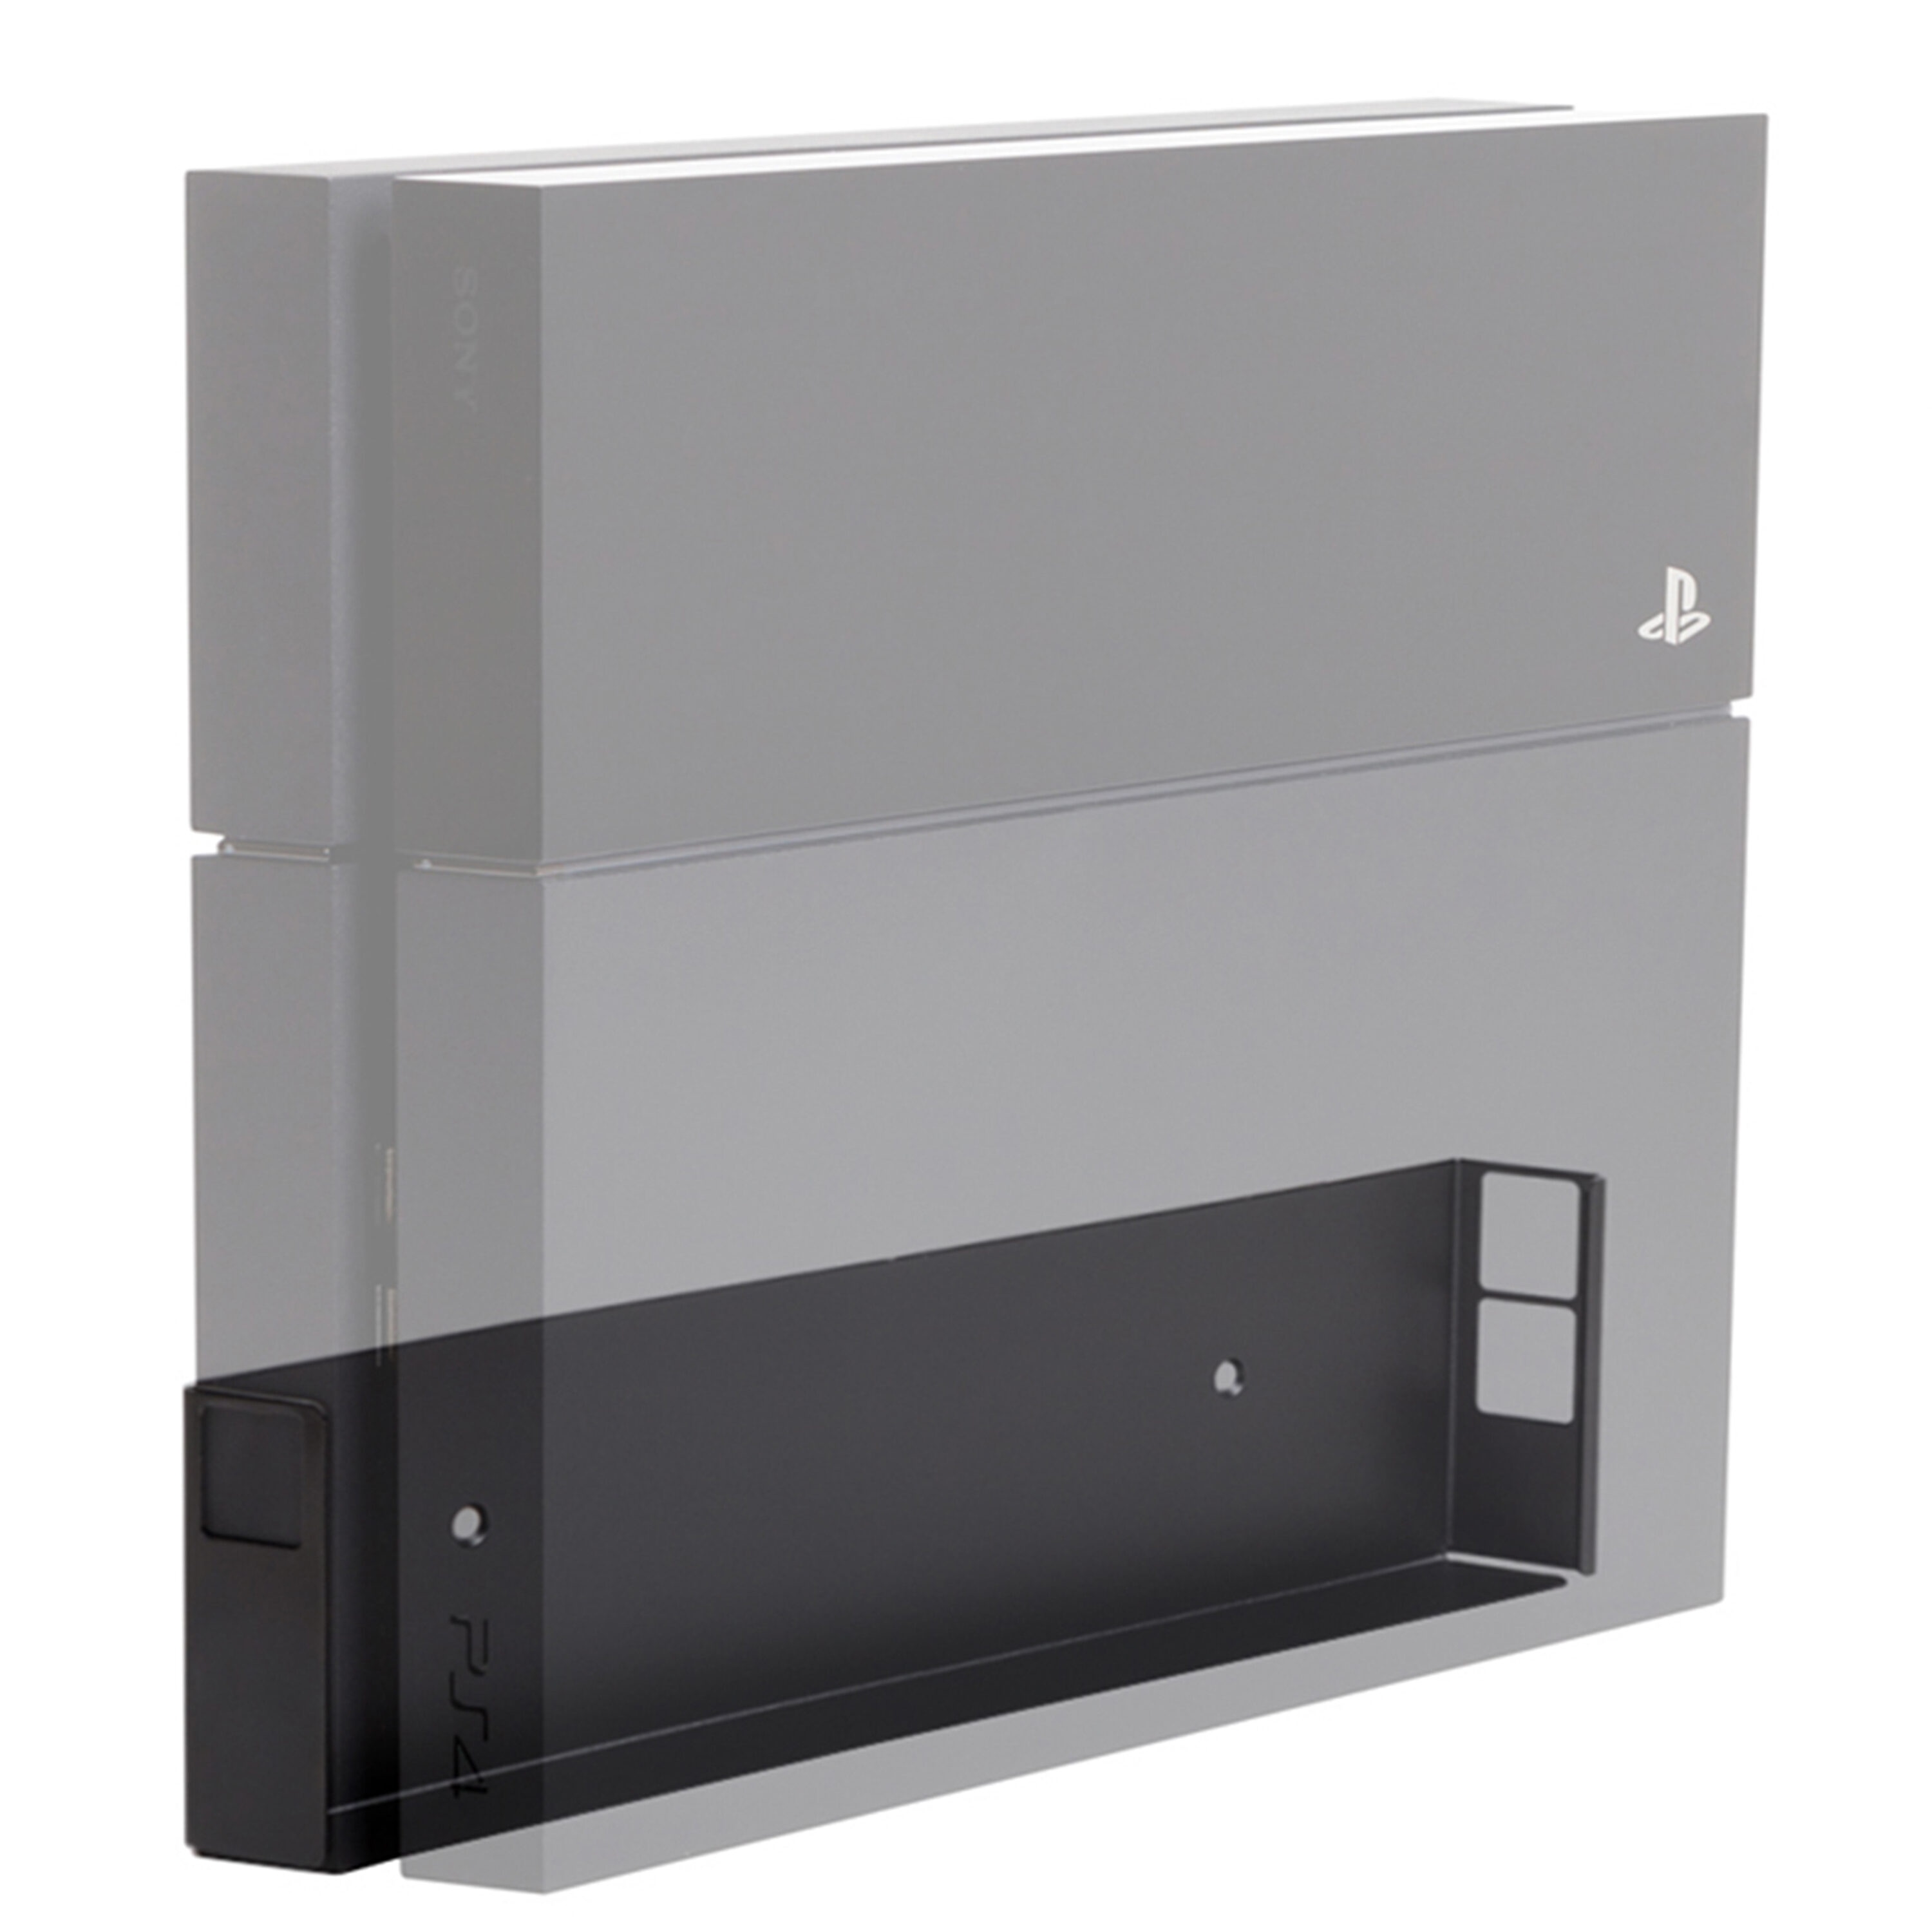 HIDEit Mounts Original PS4 Black Powder Console in the Video Gaming department at Lowes.com